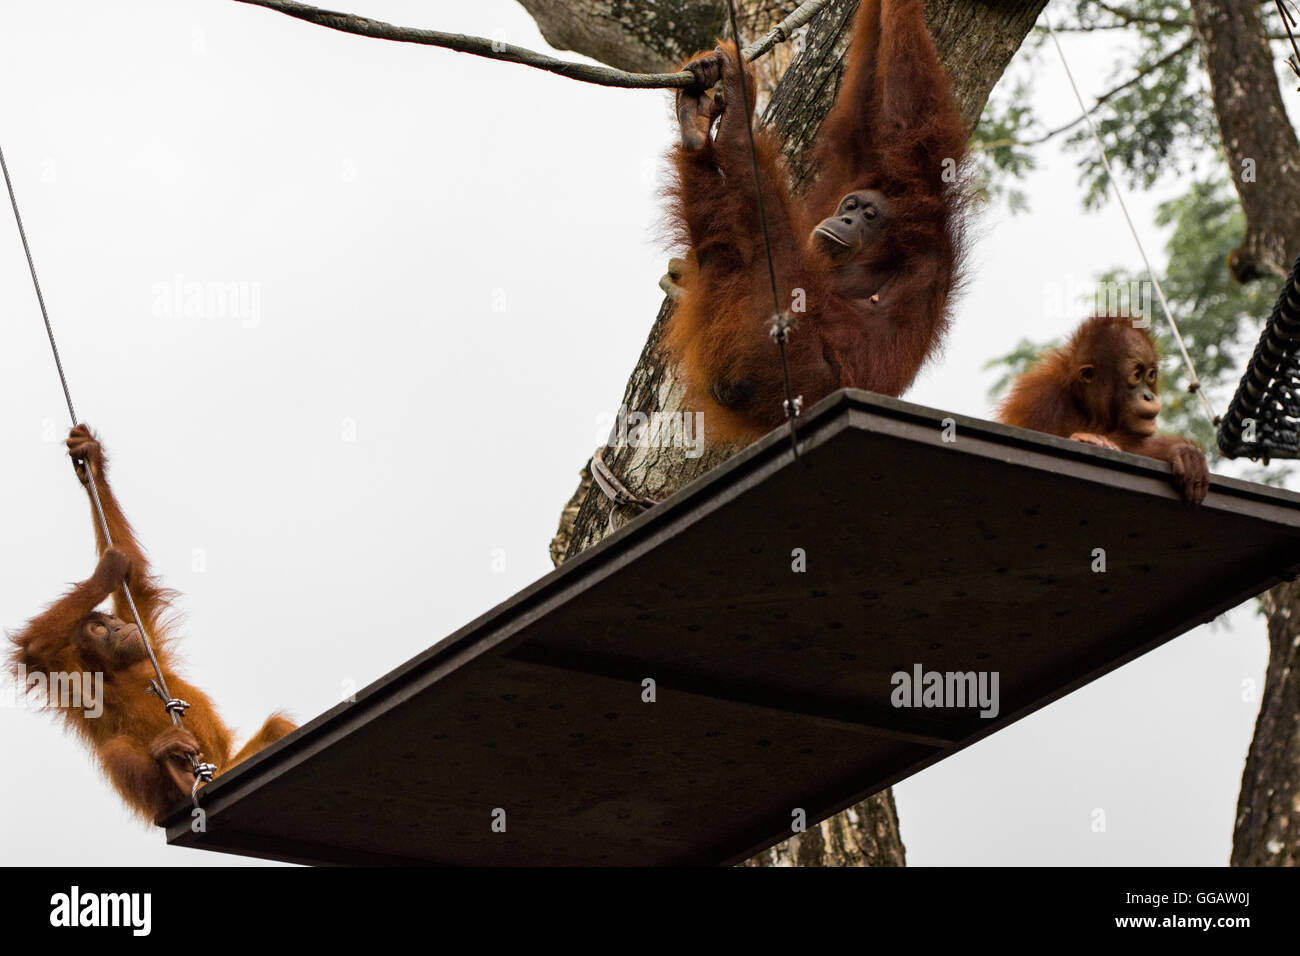 Orang Utans babies exclusively Asian species seen in singapore 2016 Stock Photo